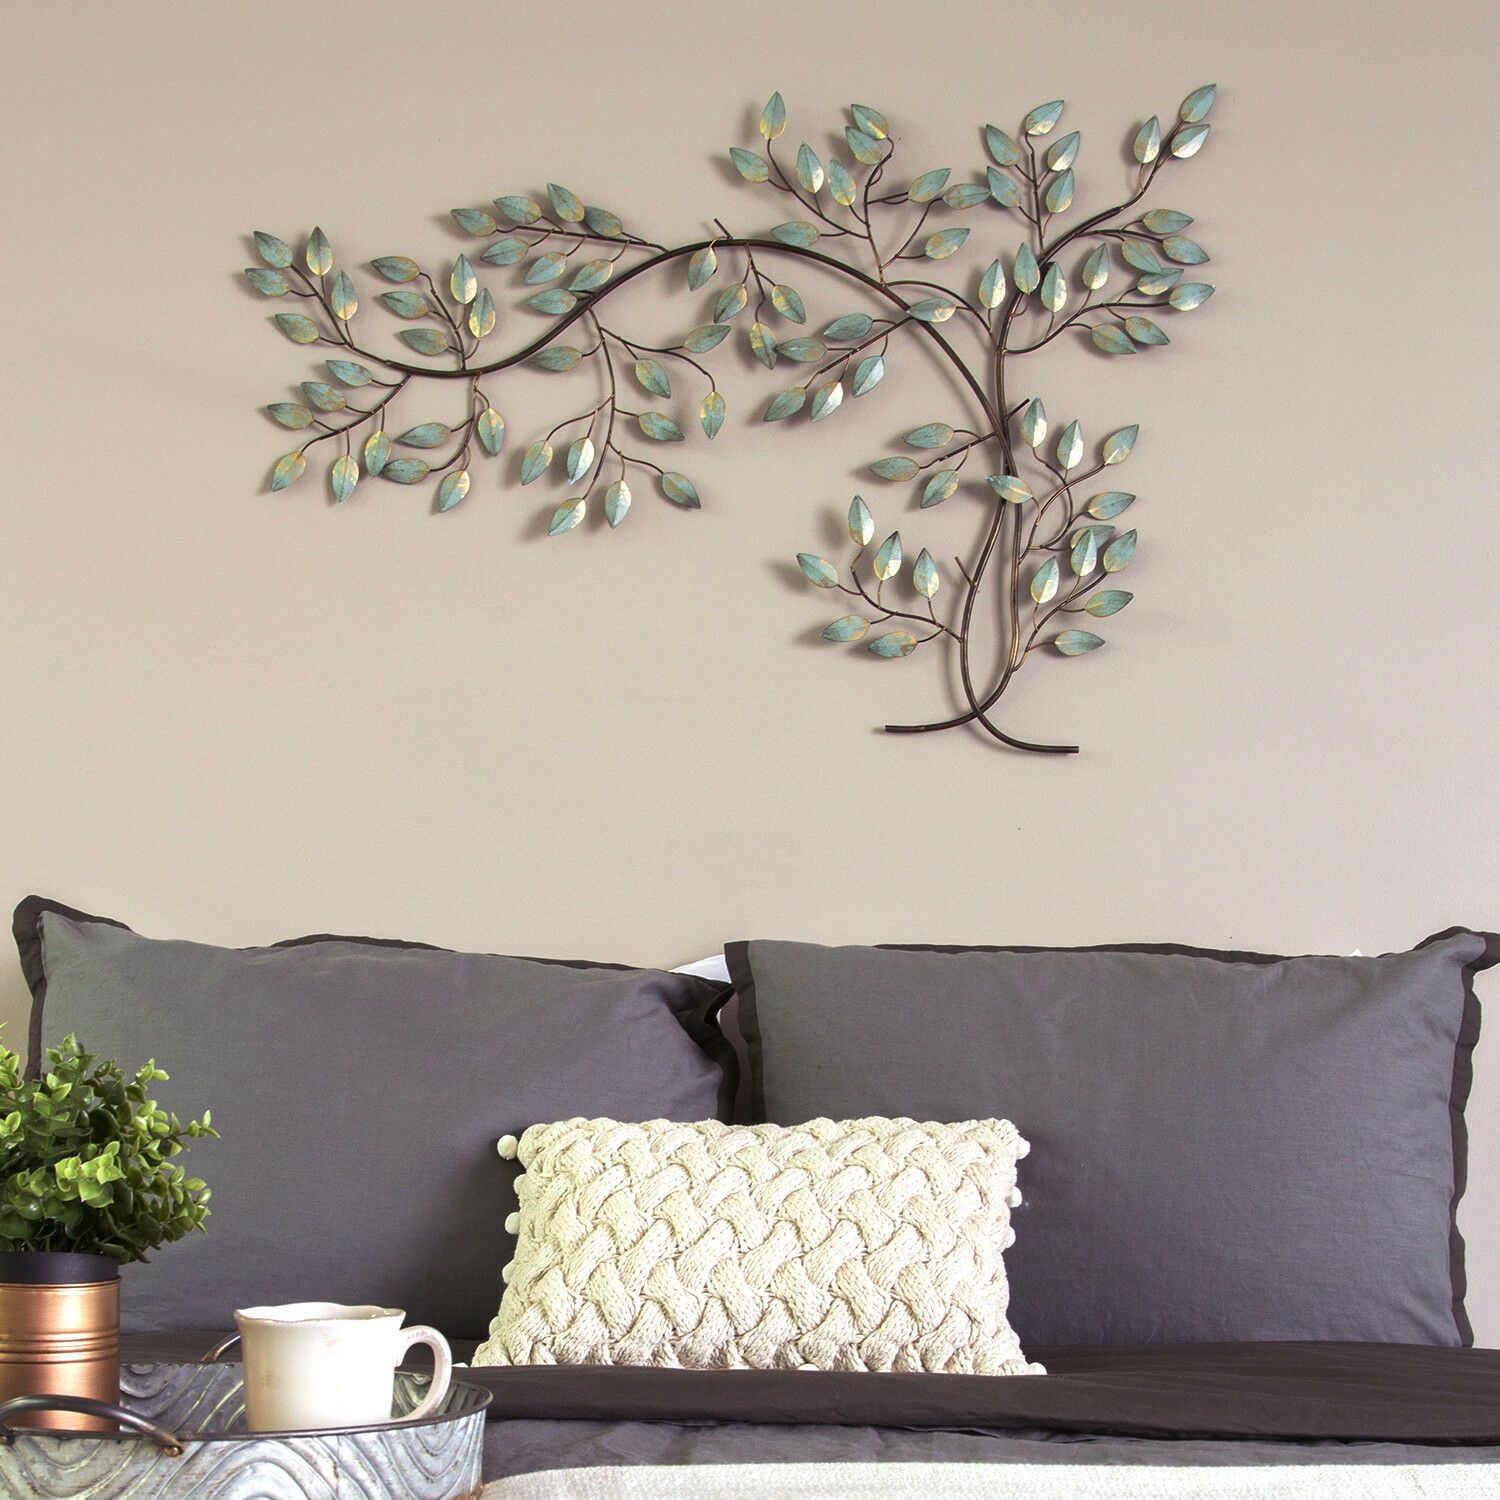 Large Metal Tree Branch Hanging Interior Wall Art Home Decor | Ebay In Polished Metal Wall Art (View 12 of 15)